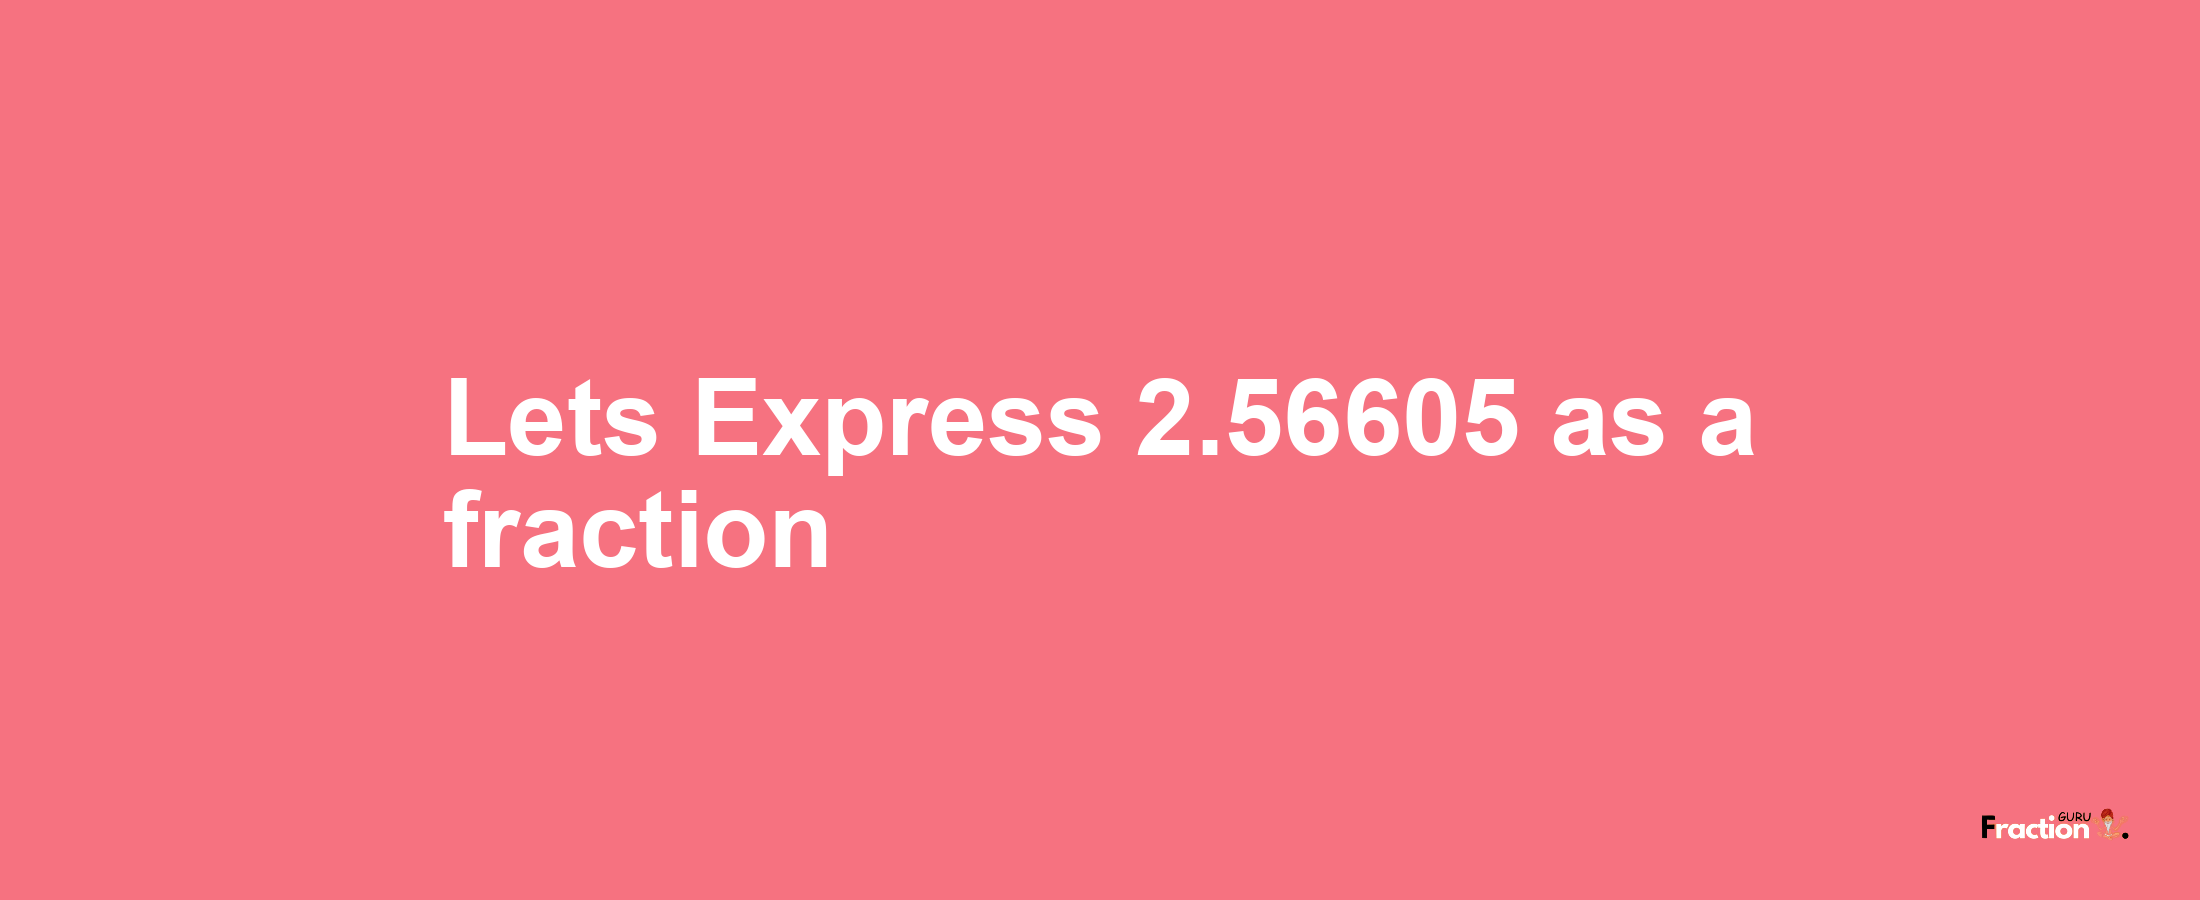 Lets Express 2.56605 as afraction